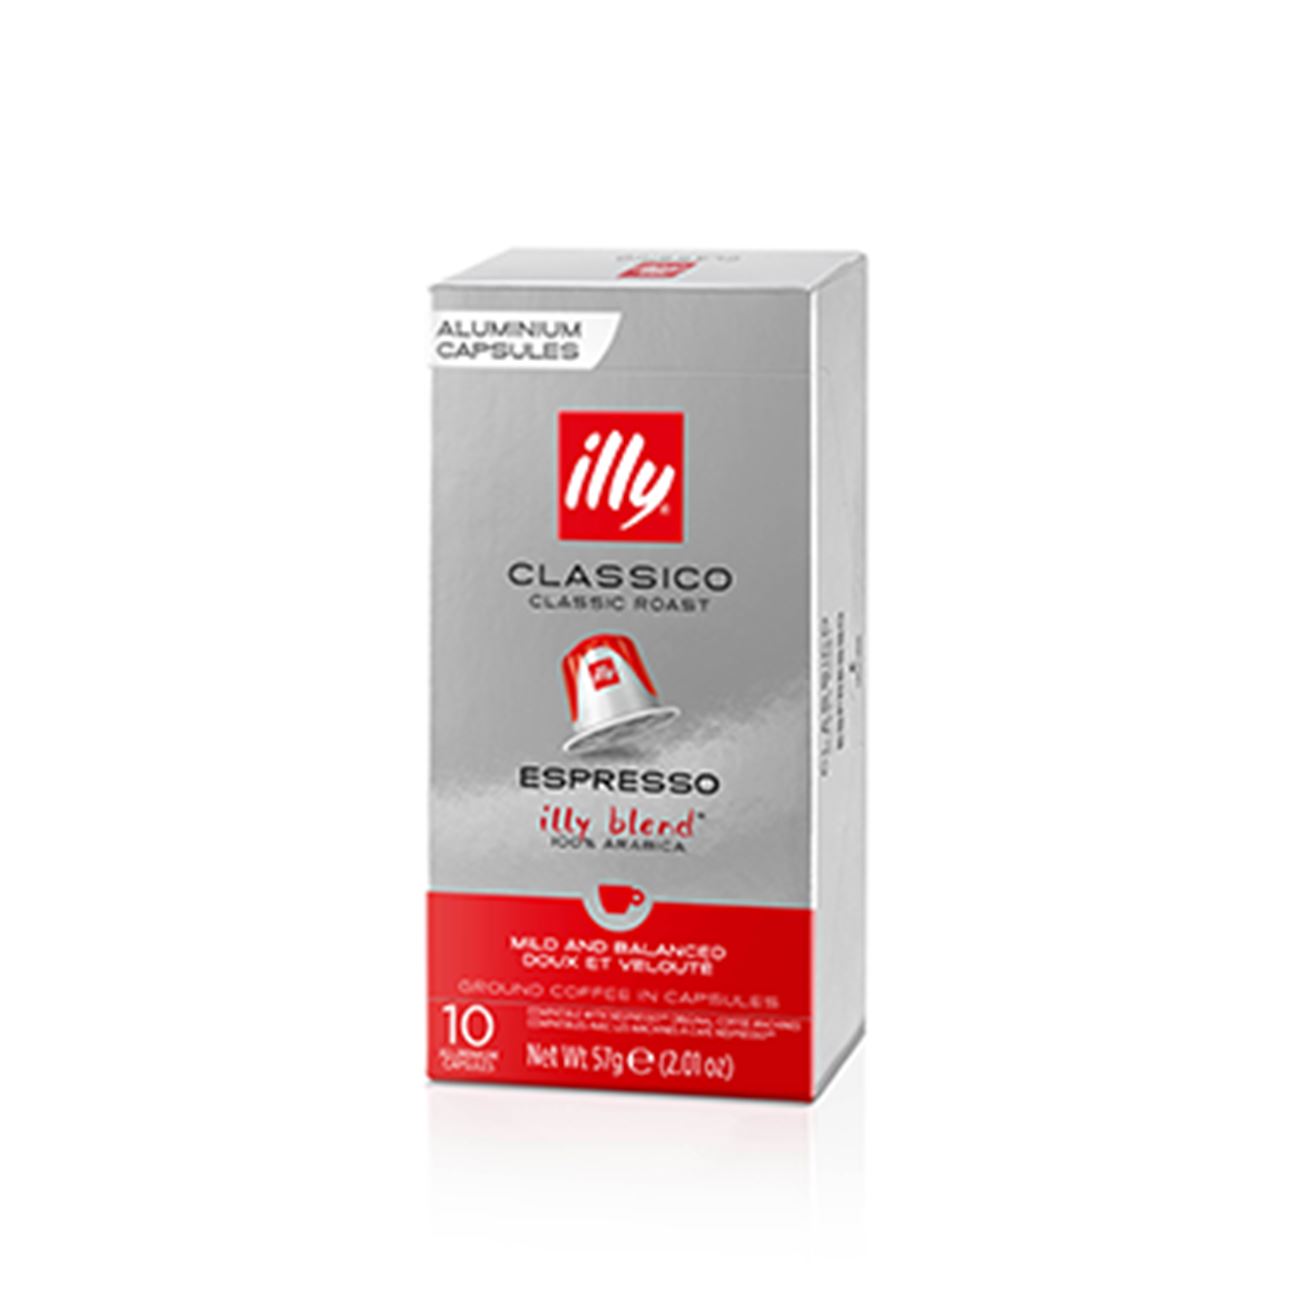 illy CLASSICO 10 COMPATIBLE ΚΑΨΟΥΛΕΣ